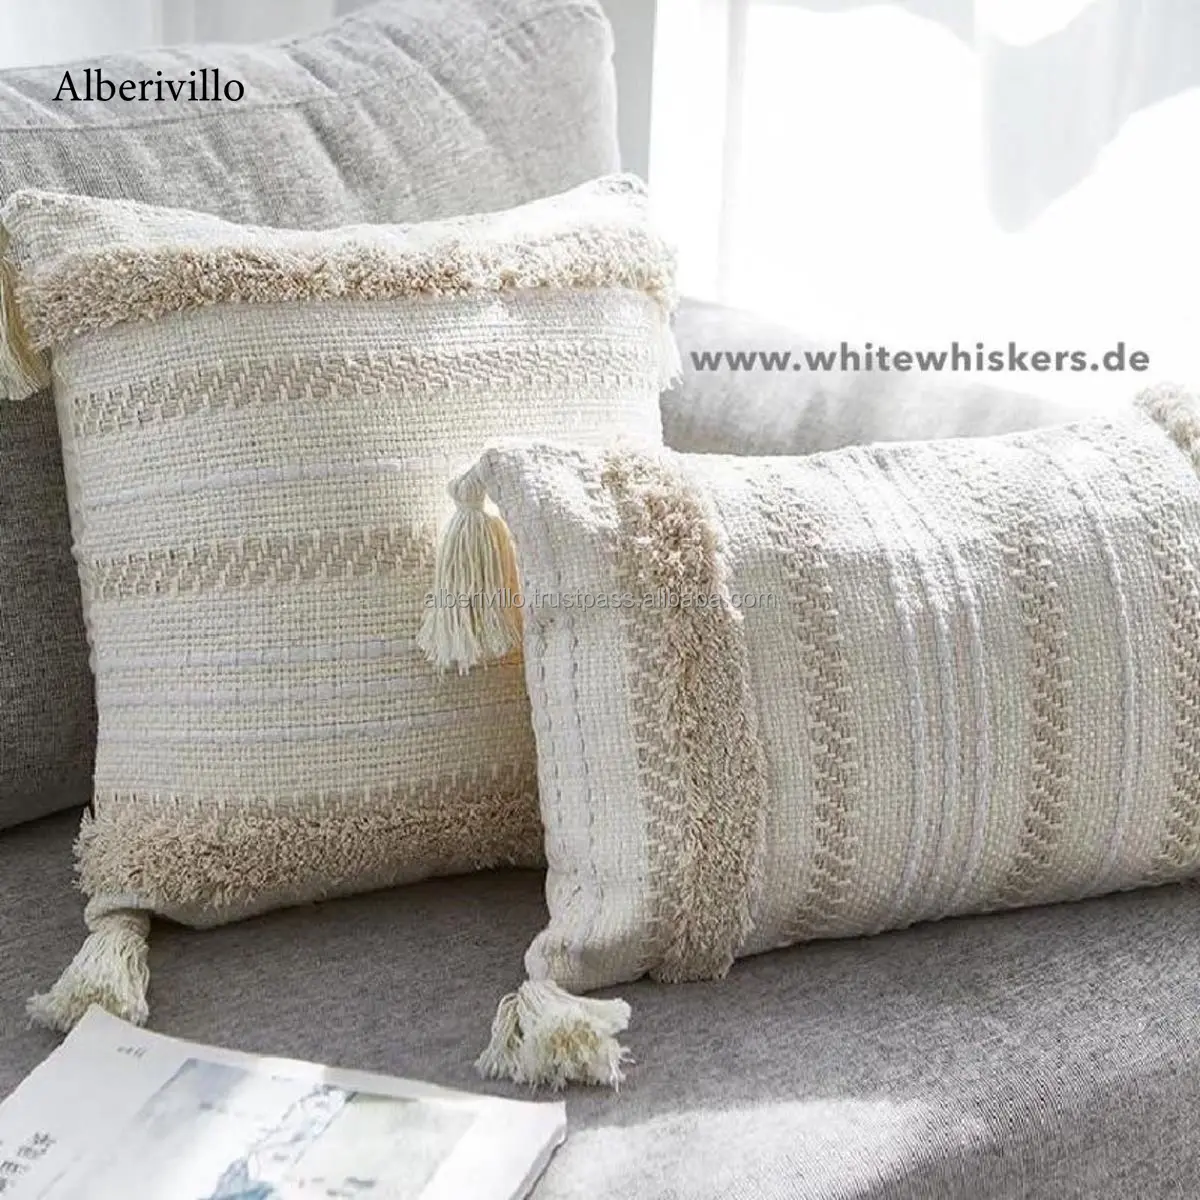 Bohemian Cushion Cover Set with Tassel for Outdoor Customized Cotton Handwoven Home Decor Outdoor Pillow Case